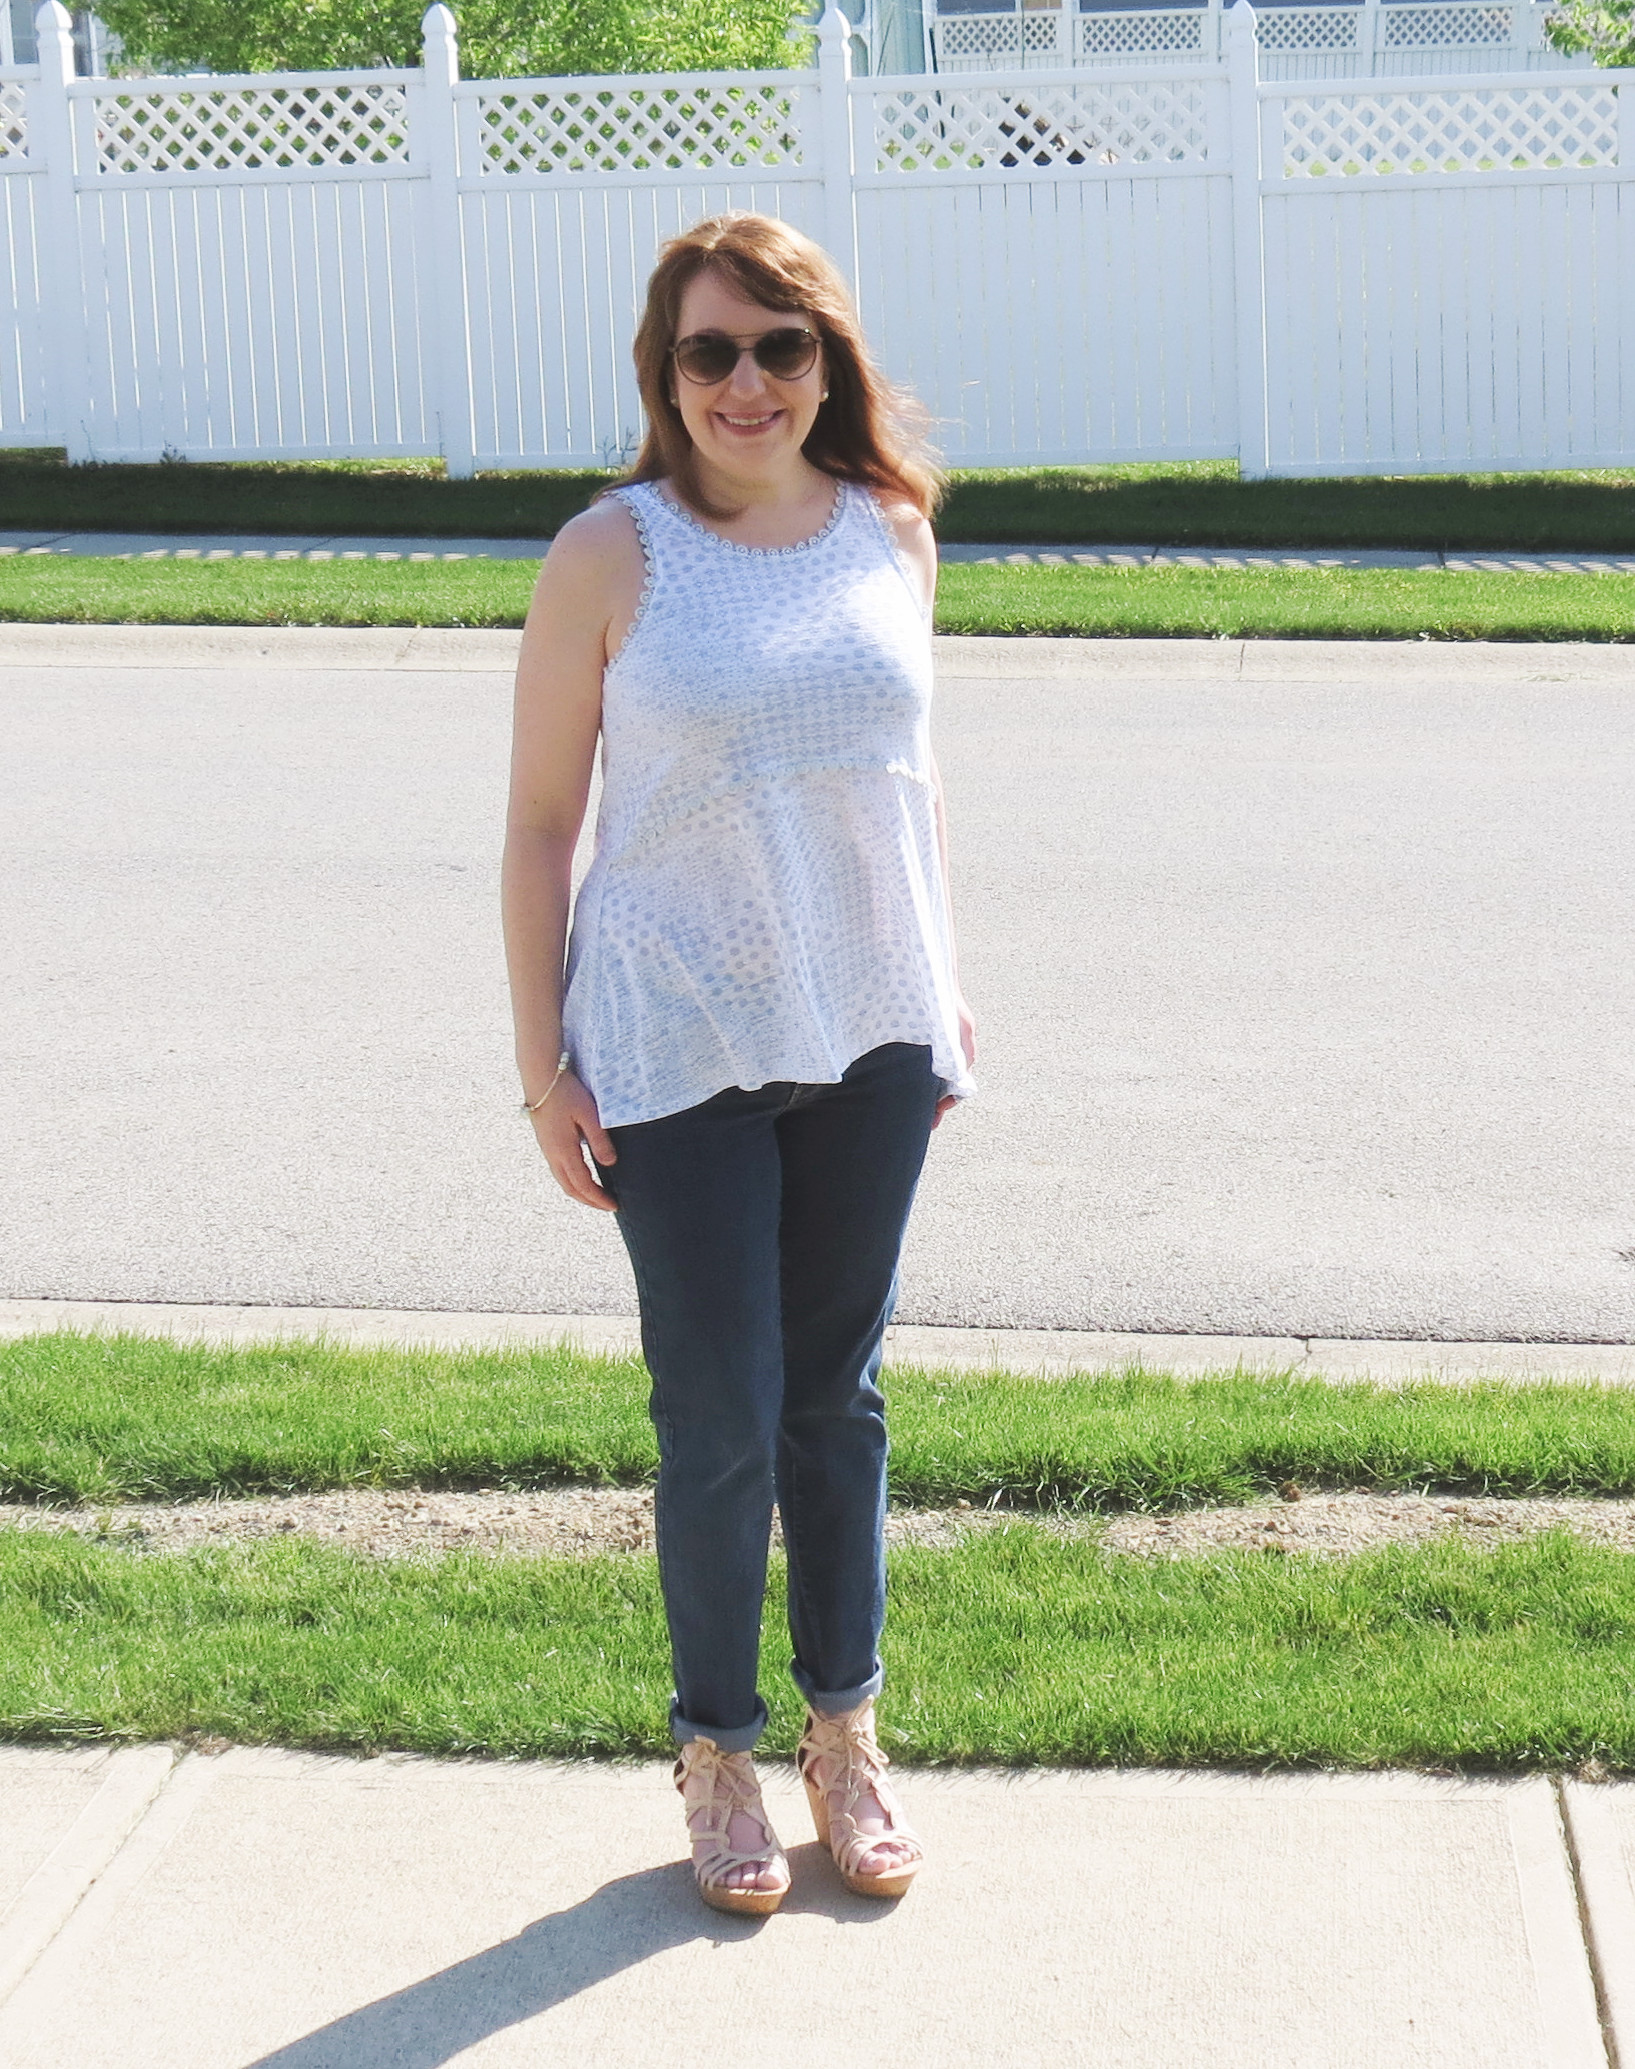 Blue And White Top, Jeans, Wedges, Sunglasses